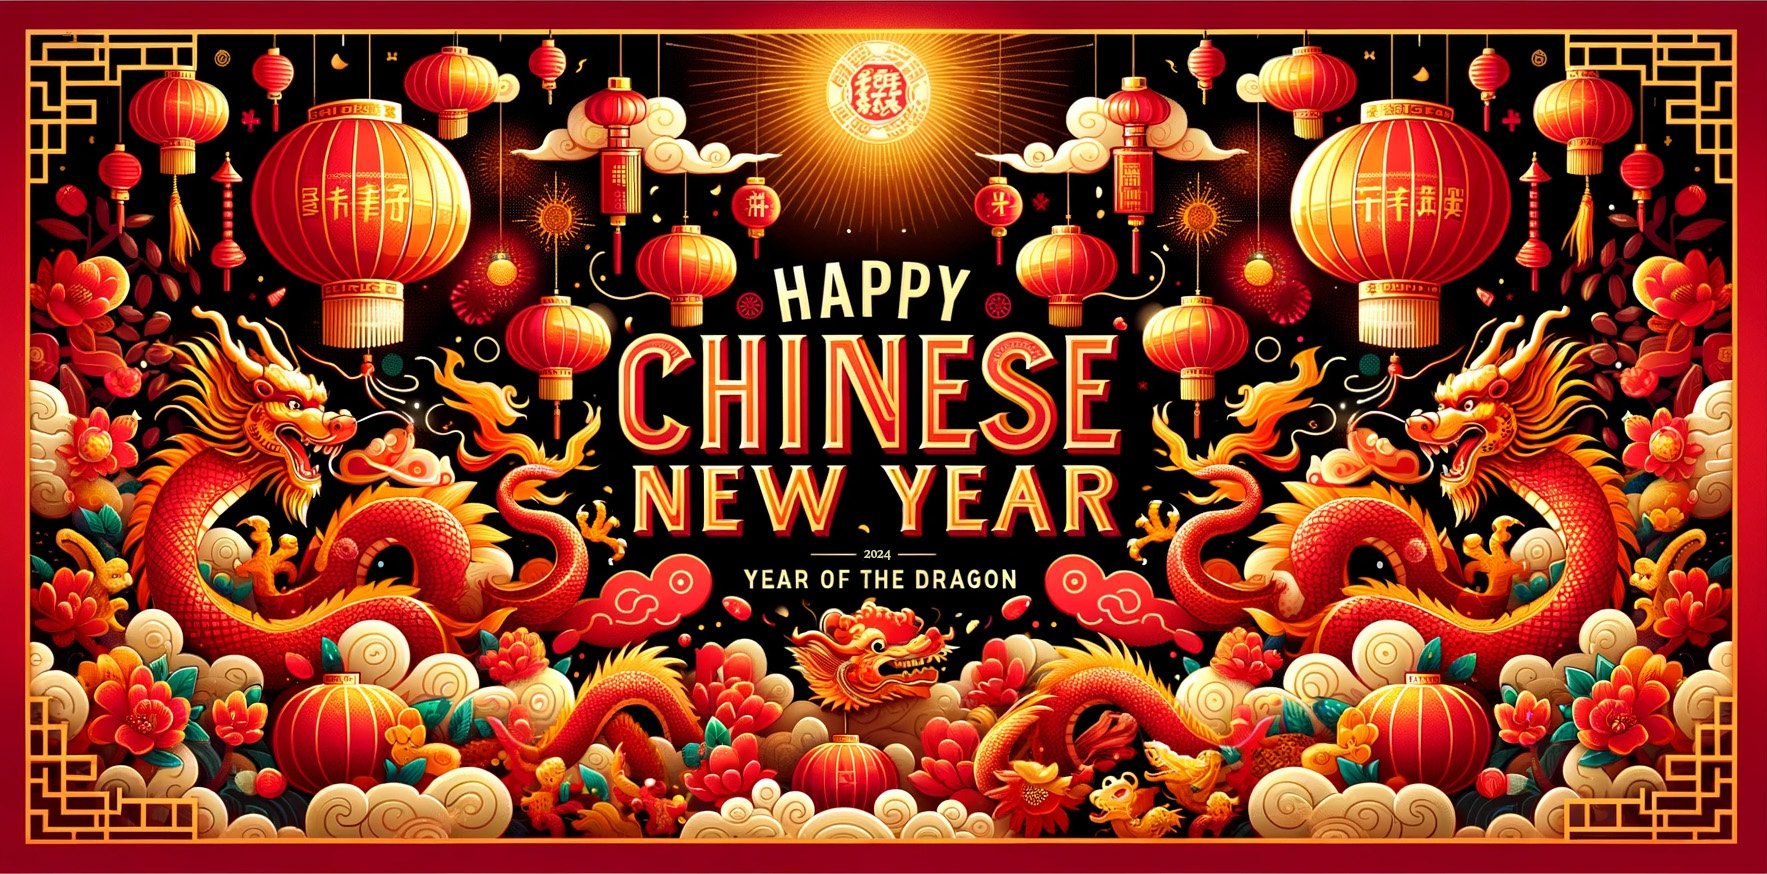 "We Wish You Health, Happiness, And Prosperity in the Year of the Dragon!"